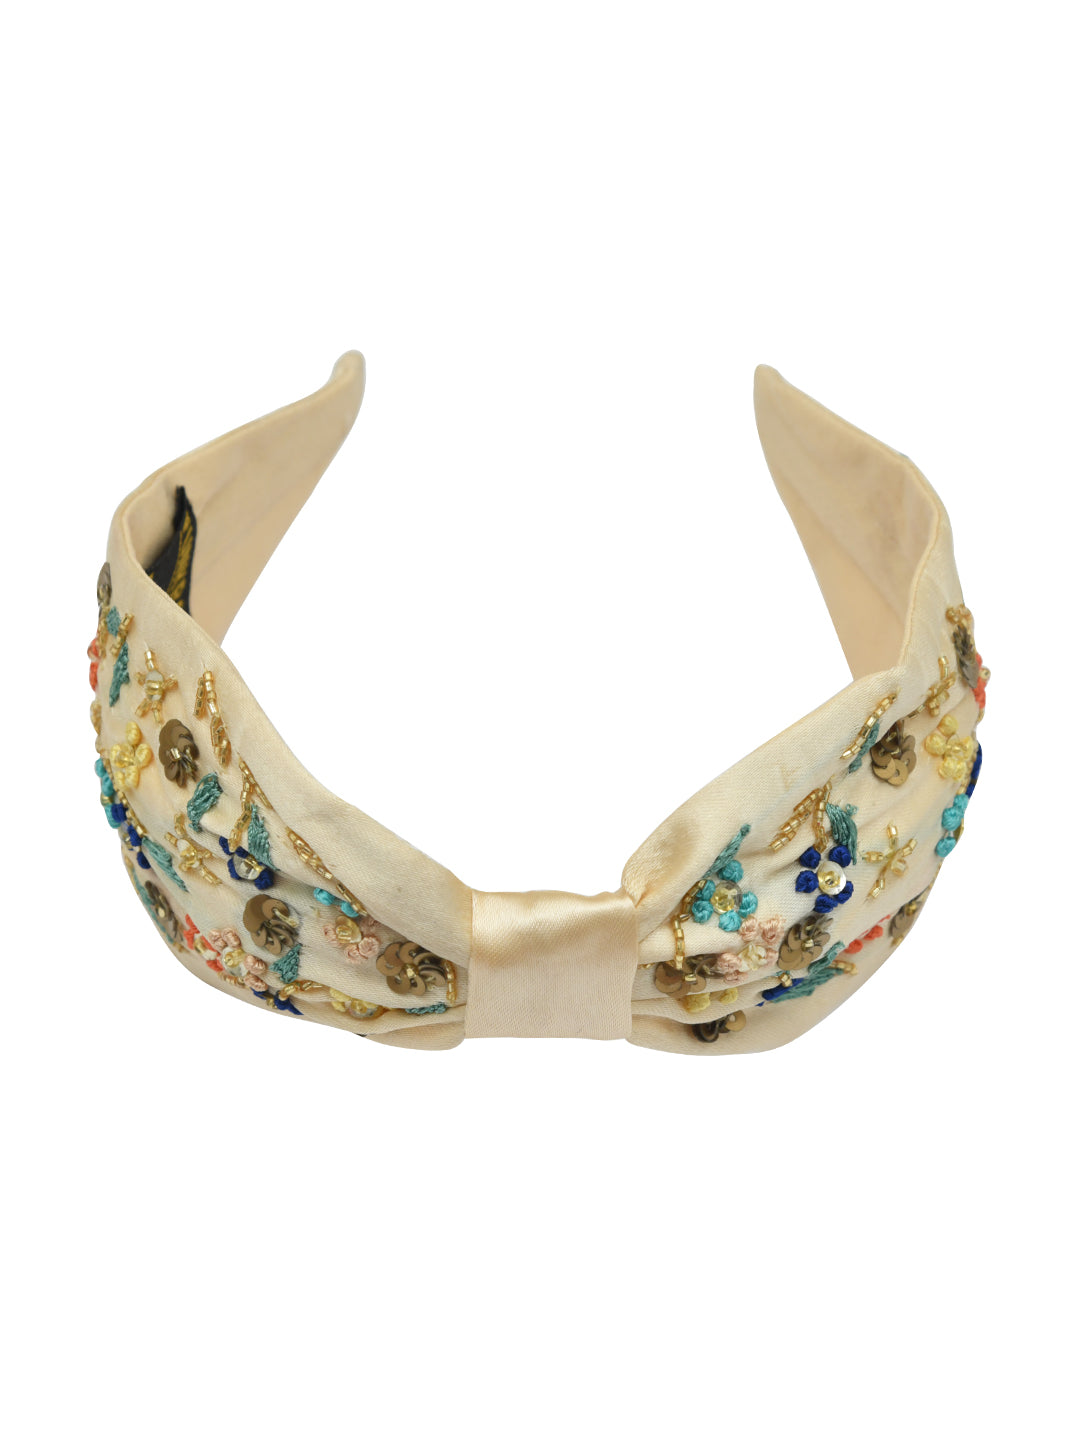 Beige Embroidered Knotted Girls Hairband